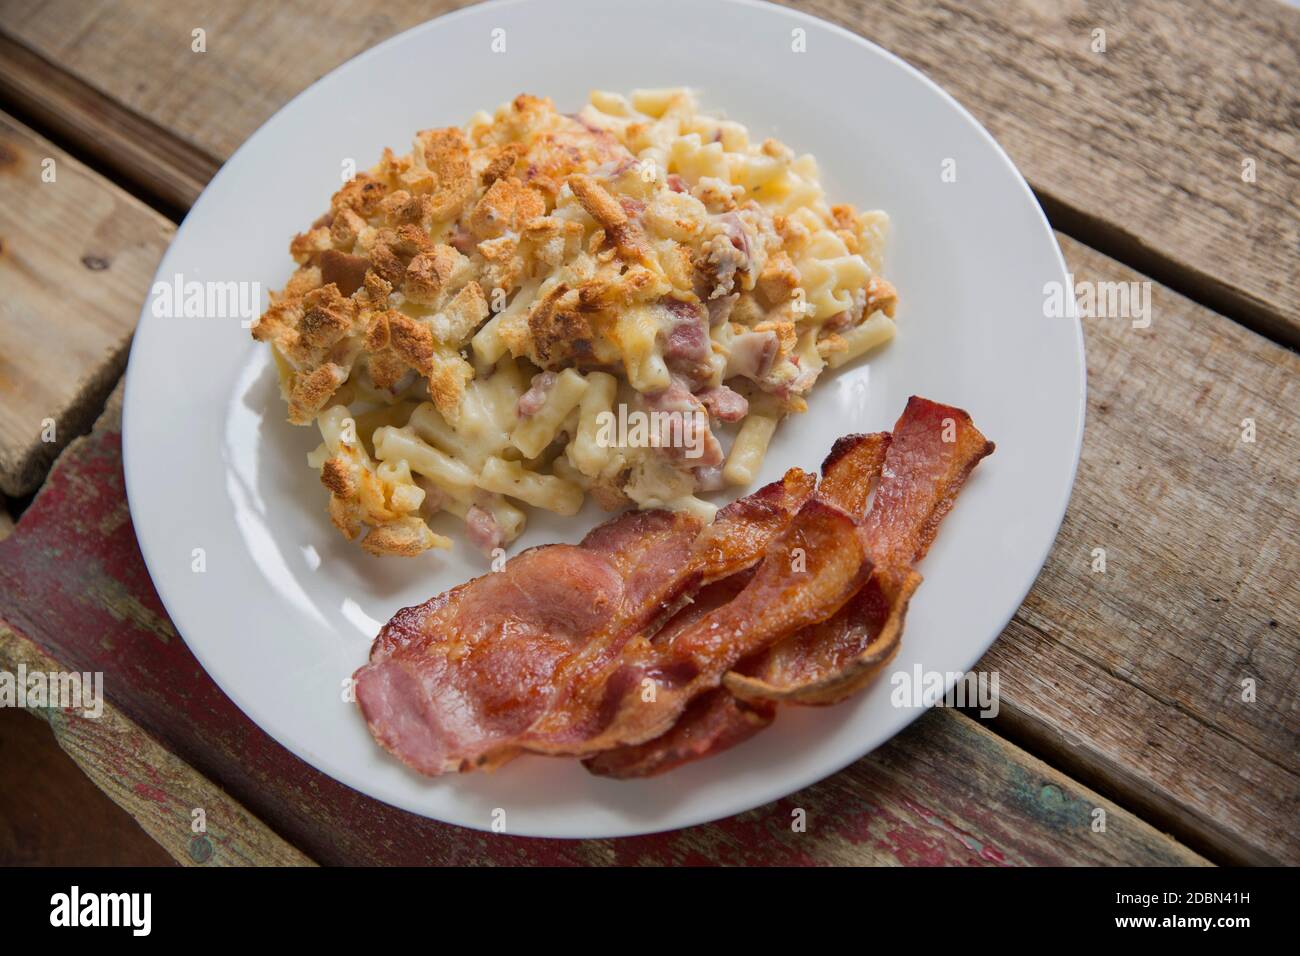 A macaroni cheese that has been made with diced smoked bacon and topped with cubed, toasted bread. Additional rashers of grilled smoky bacon have been Stock Photo